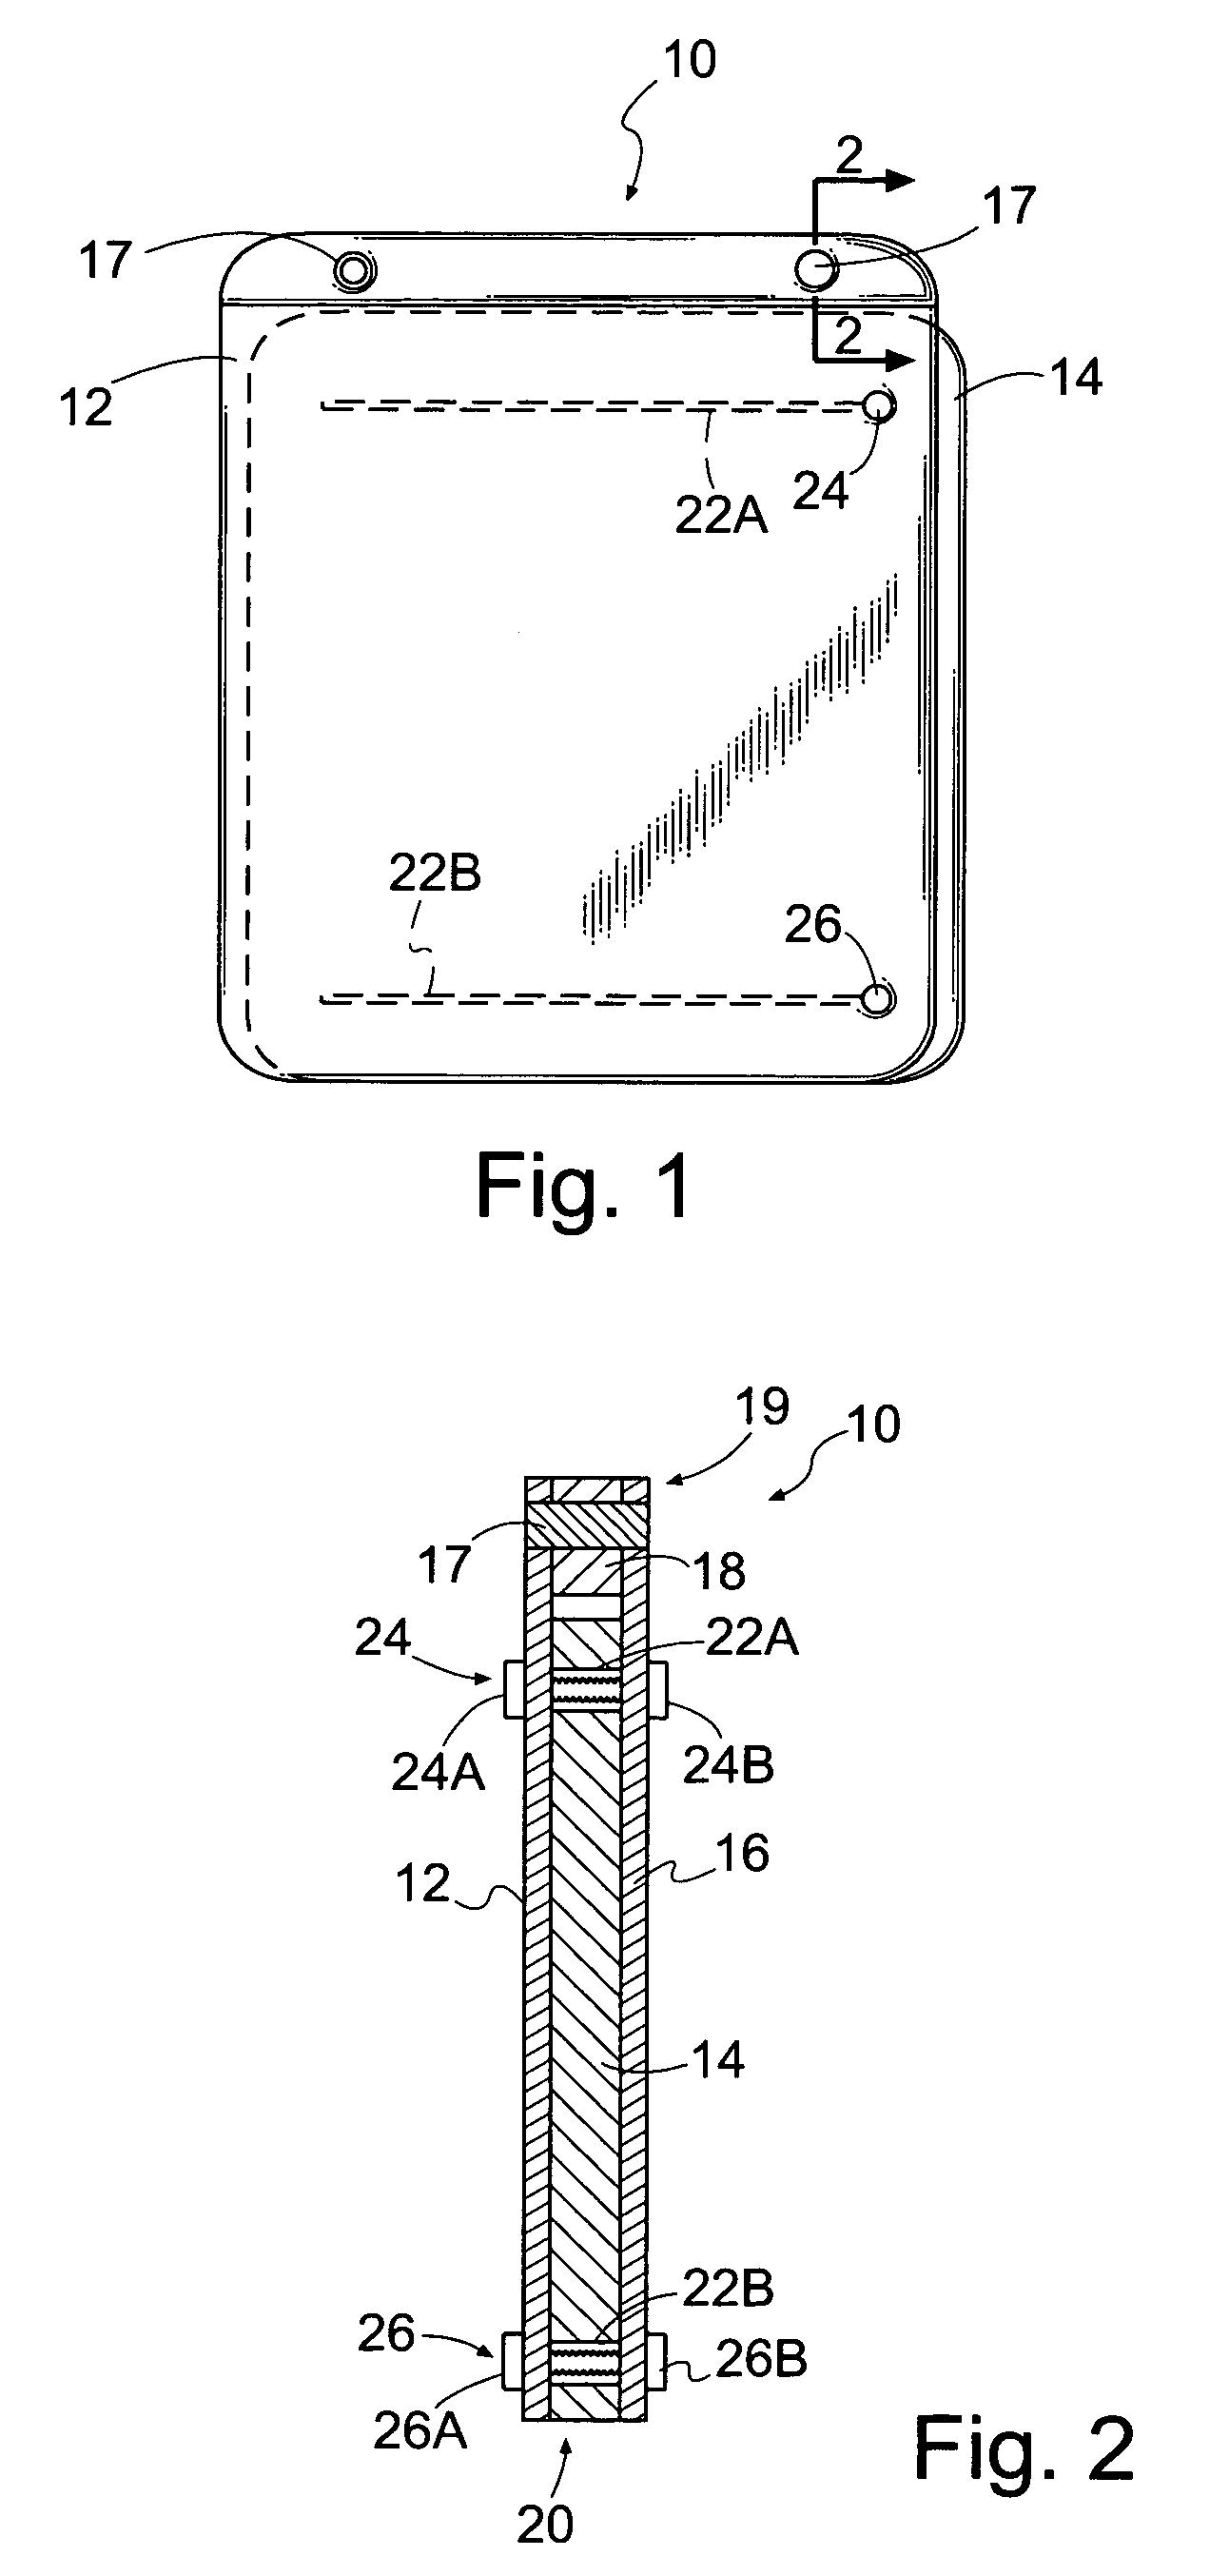 Portable writing platform for providing a stable writing surface adjacent to a book